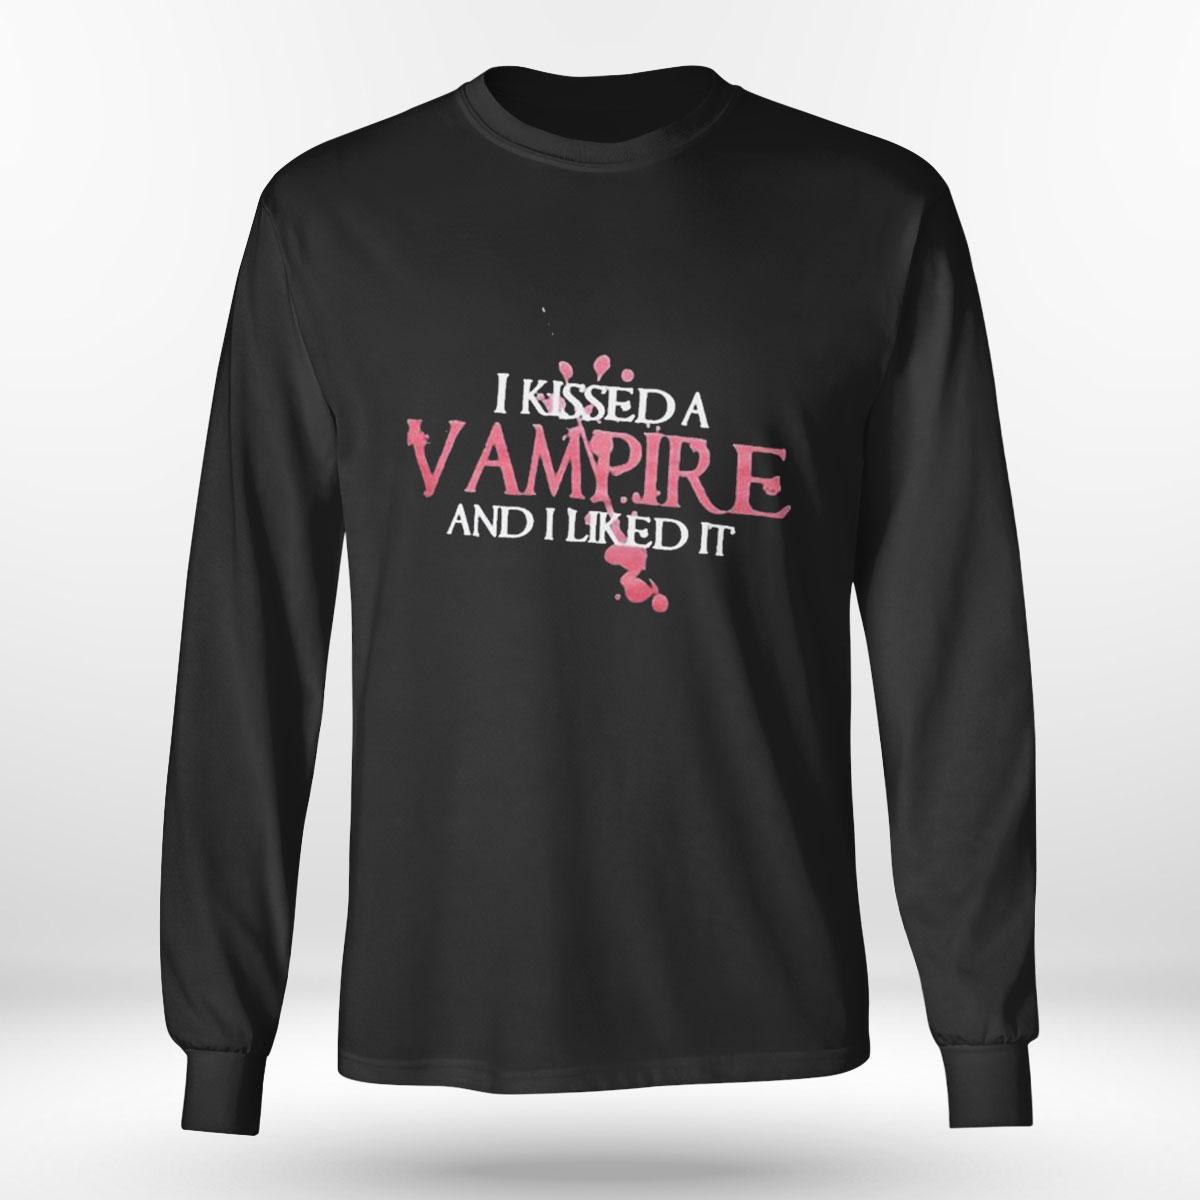 I Kissed A Vampire And I Liked It T-shirt